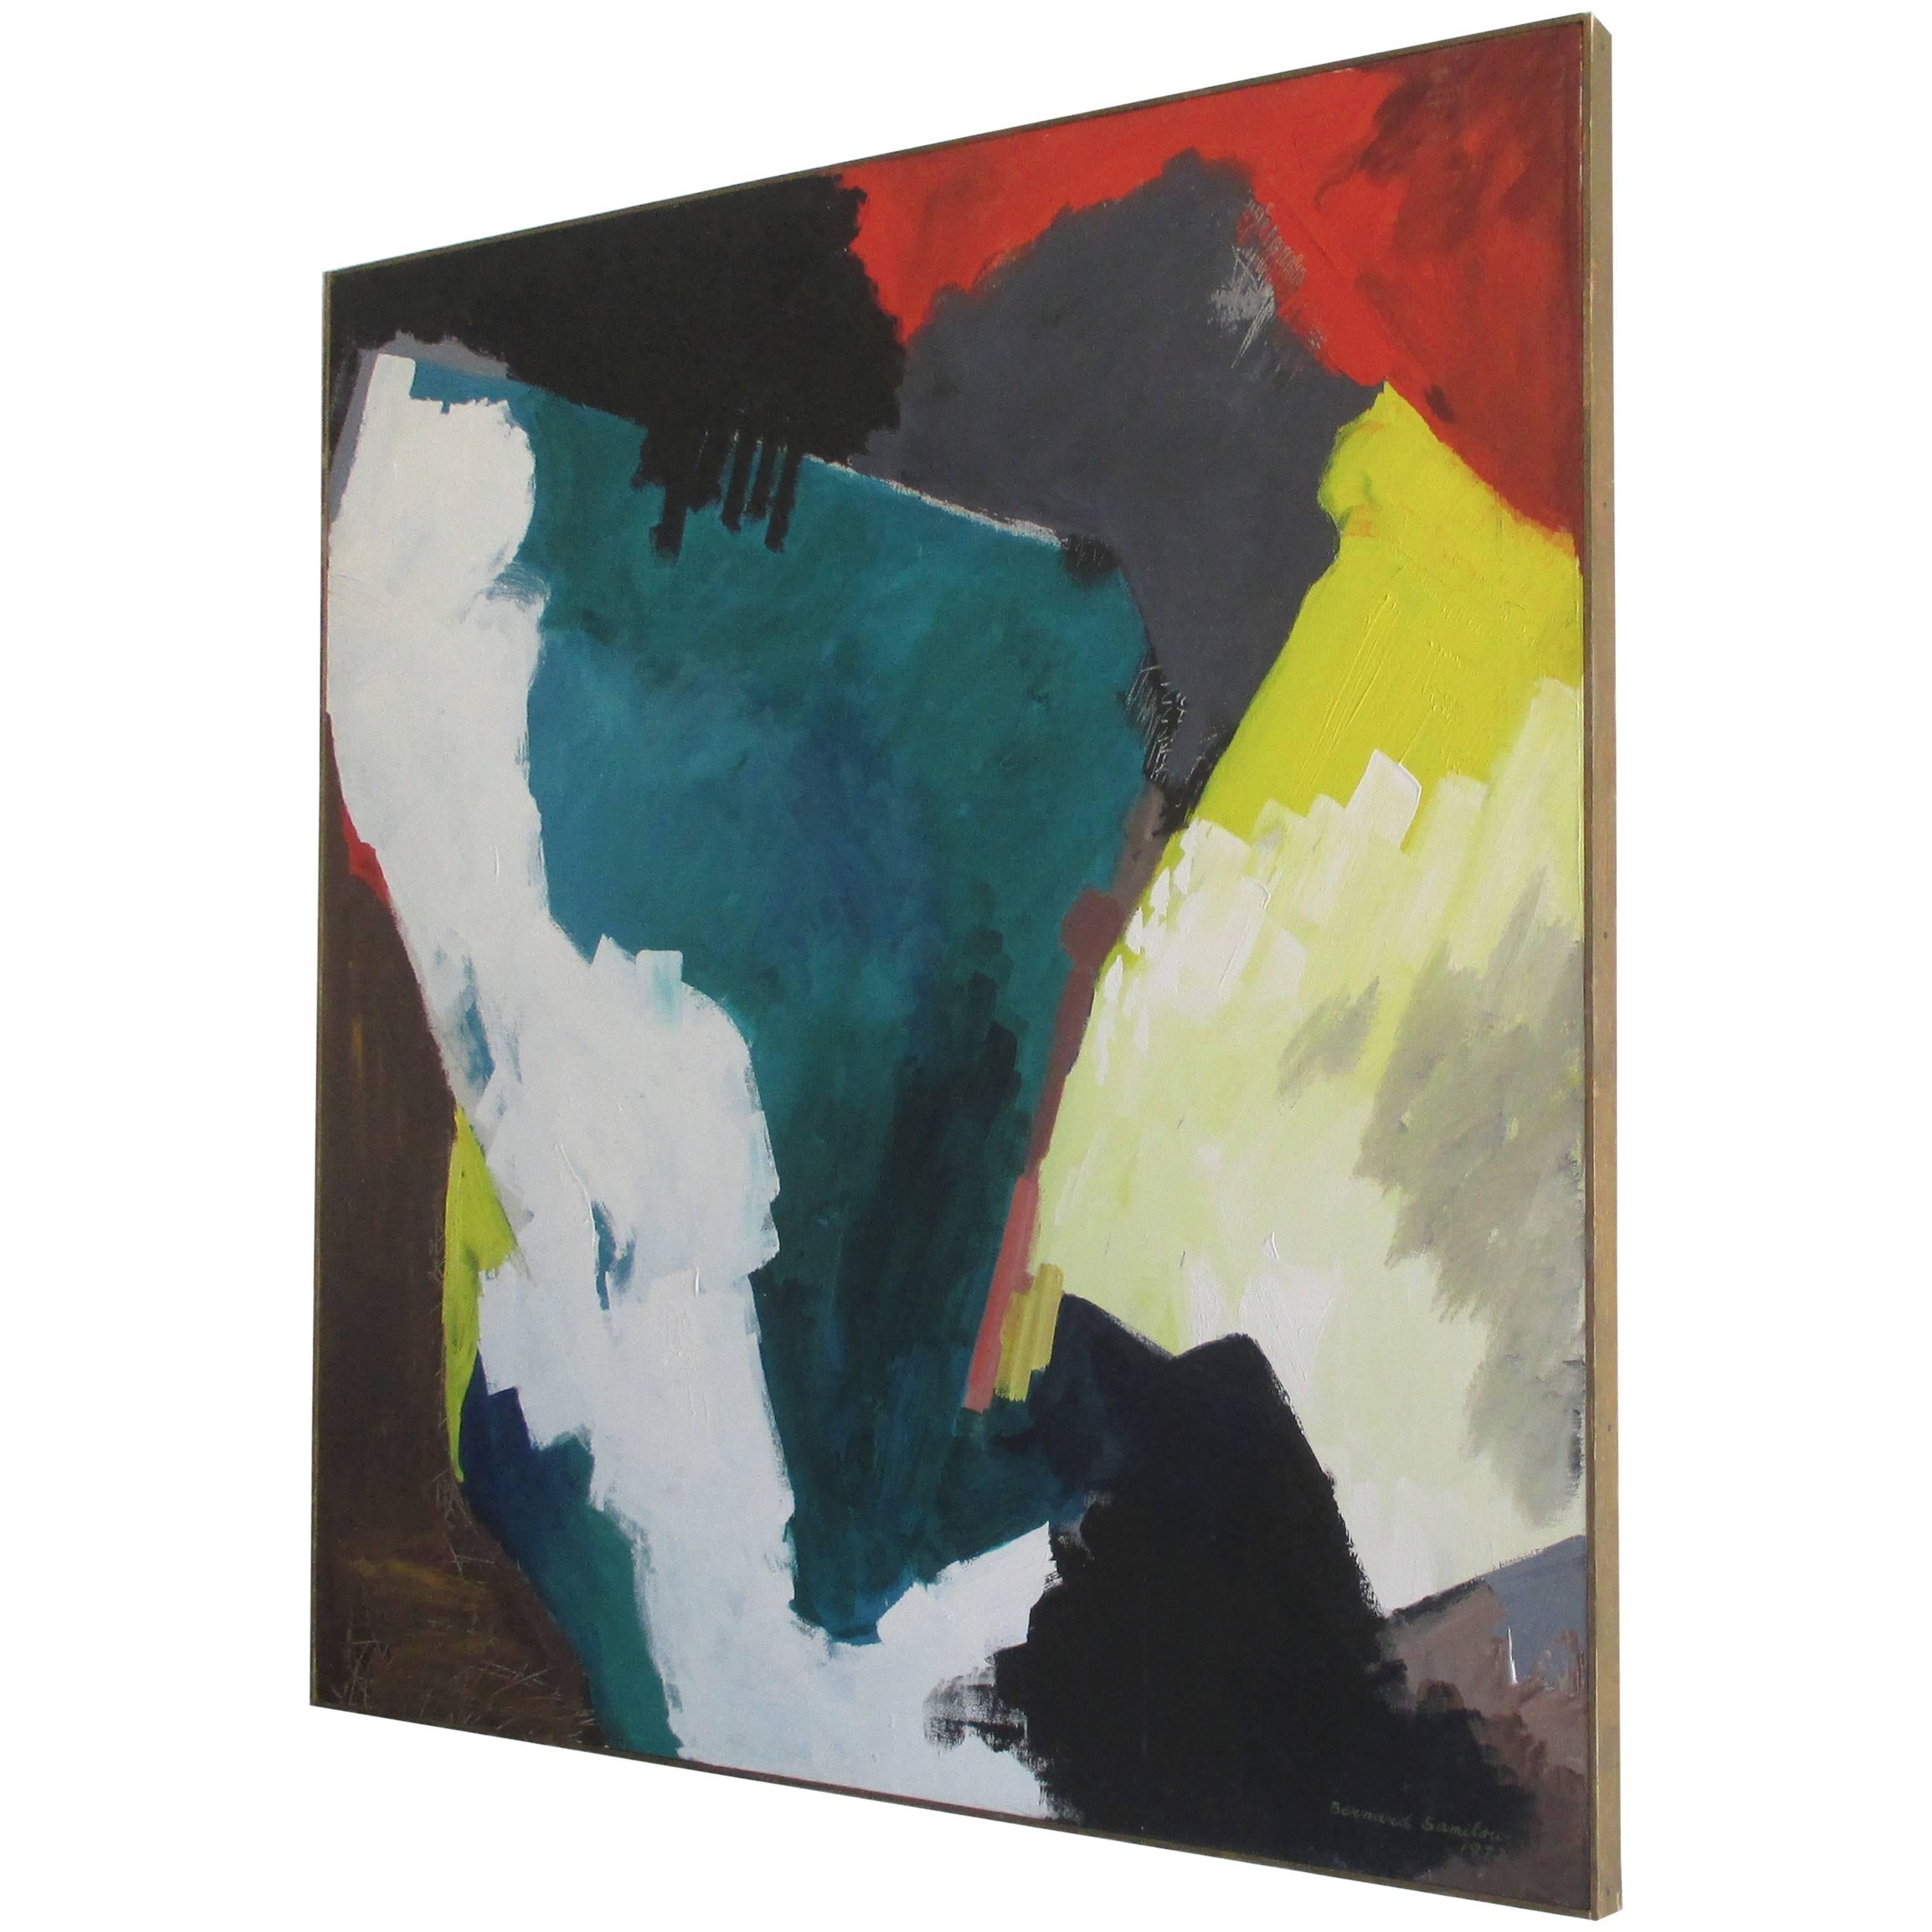 Large Framed Abstract Oil Painting on Canvas by Bernard Samilow, 1972